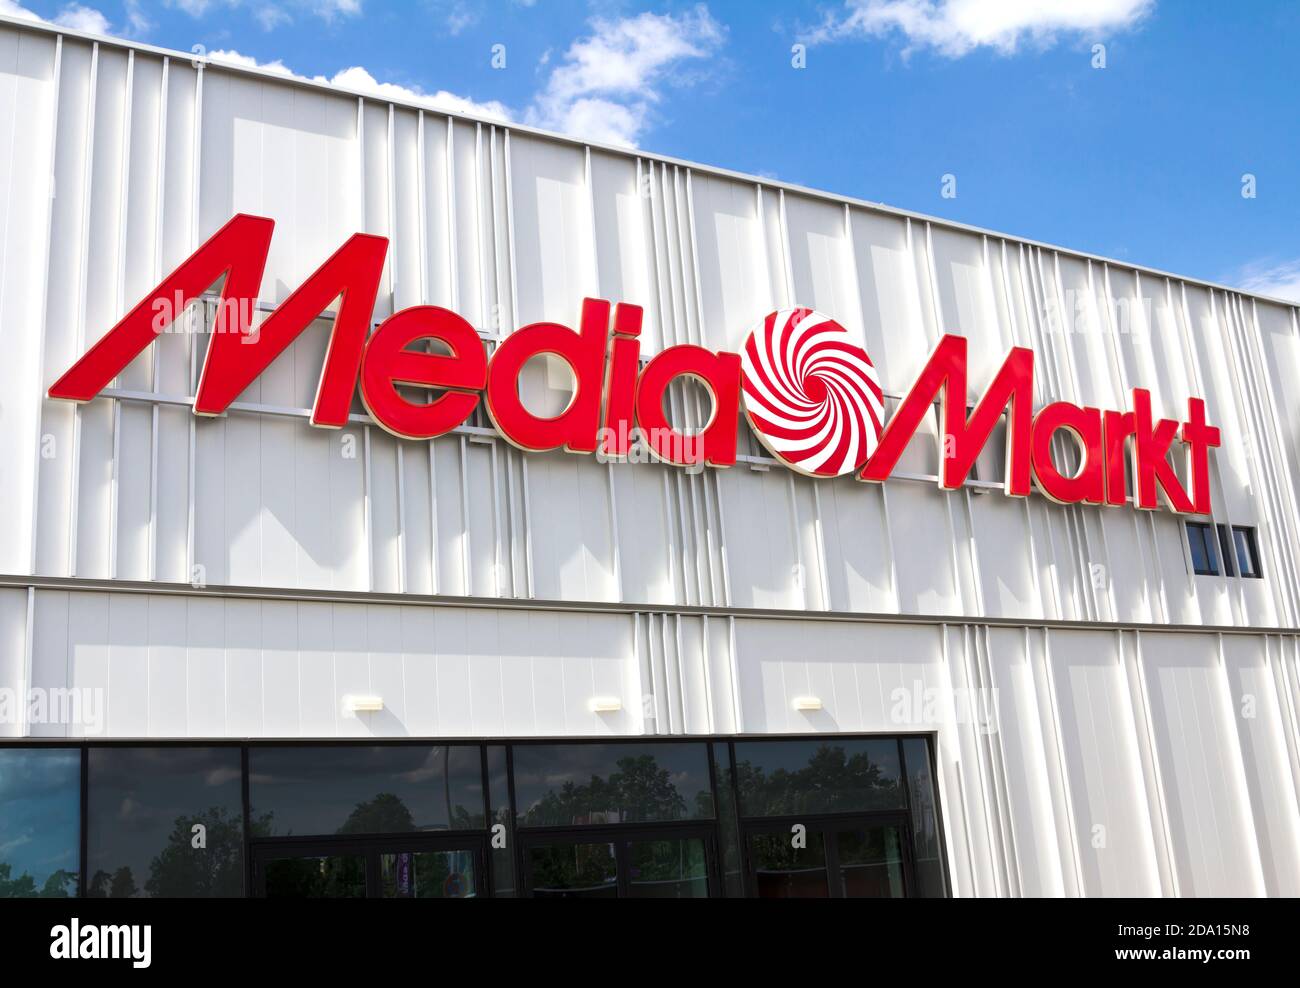 History of MEDIA MARKT Media Markt is a German chain of stores